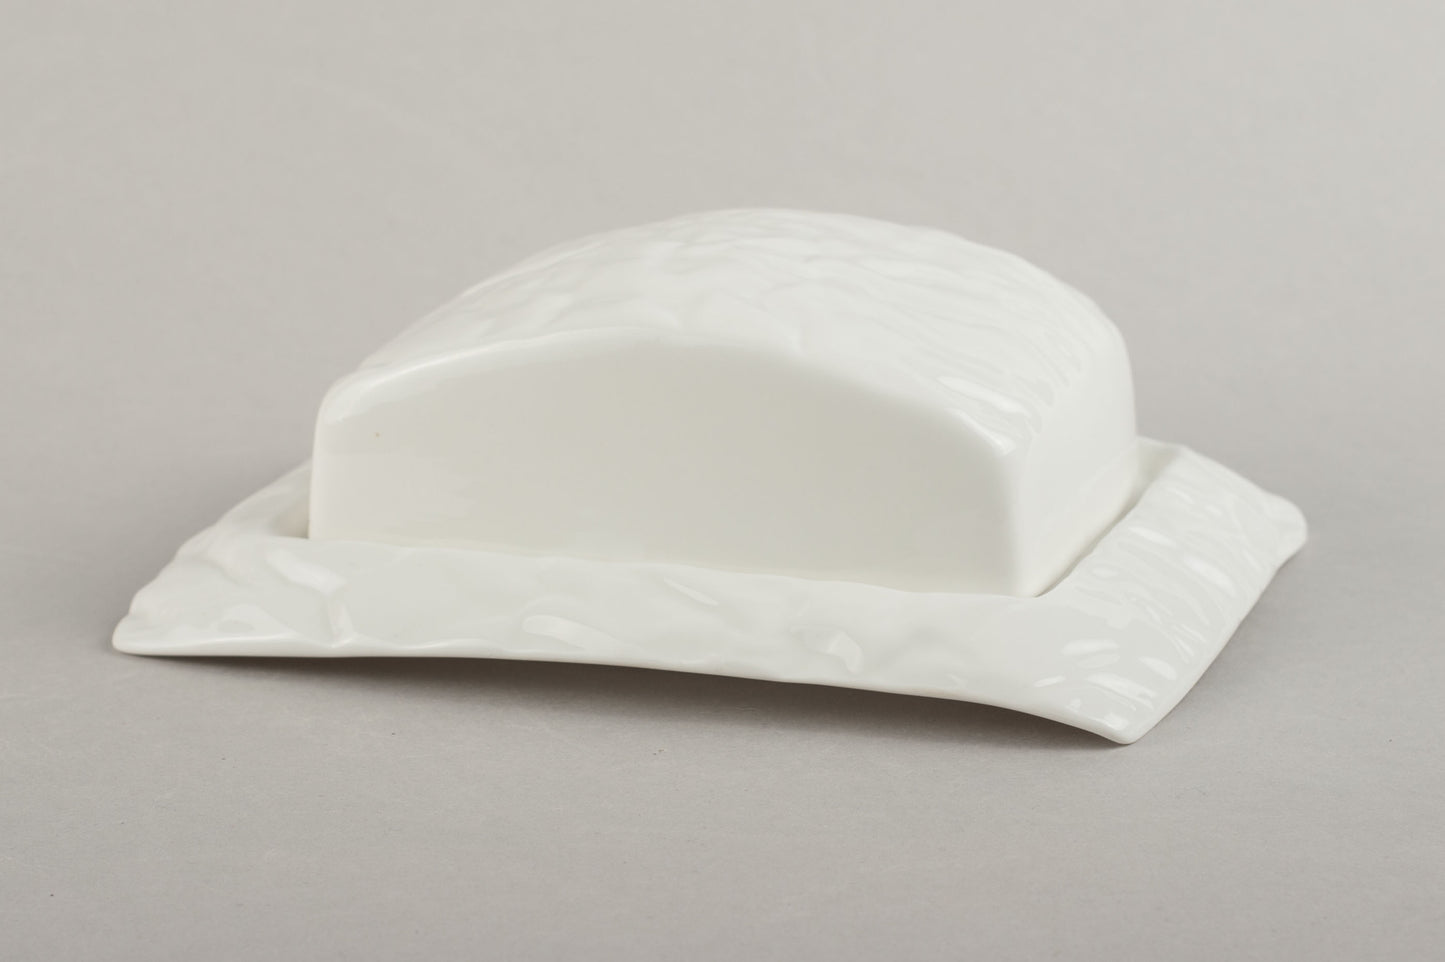 Porcelain Crumpled Butter Container